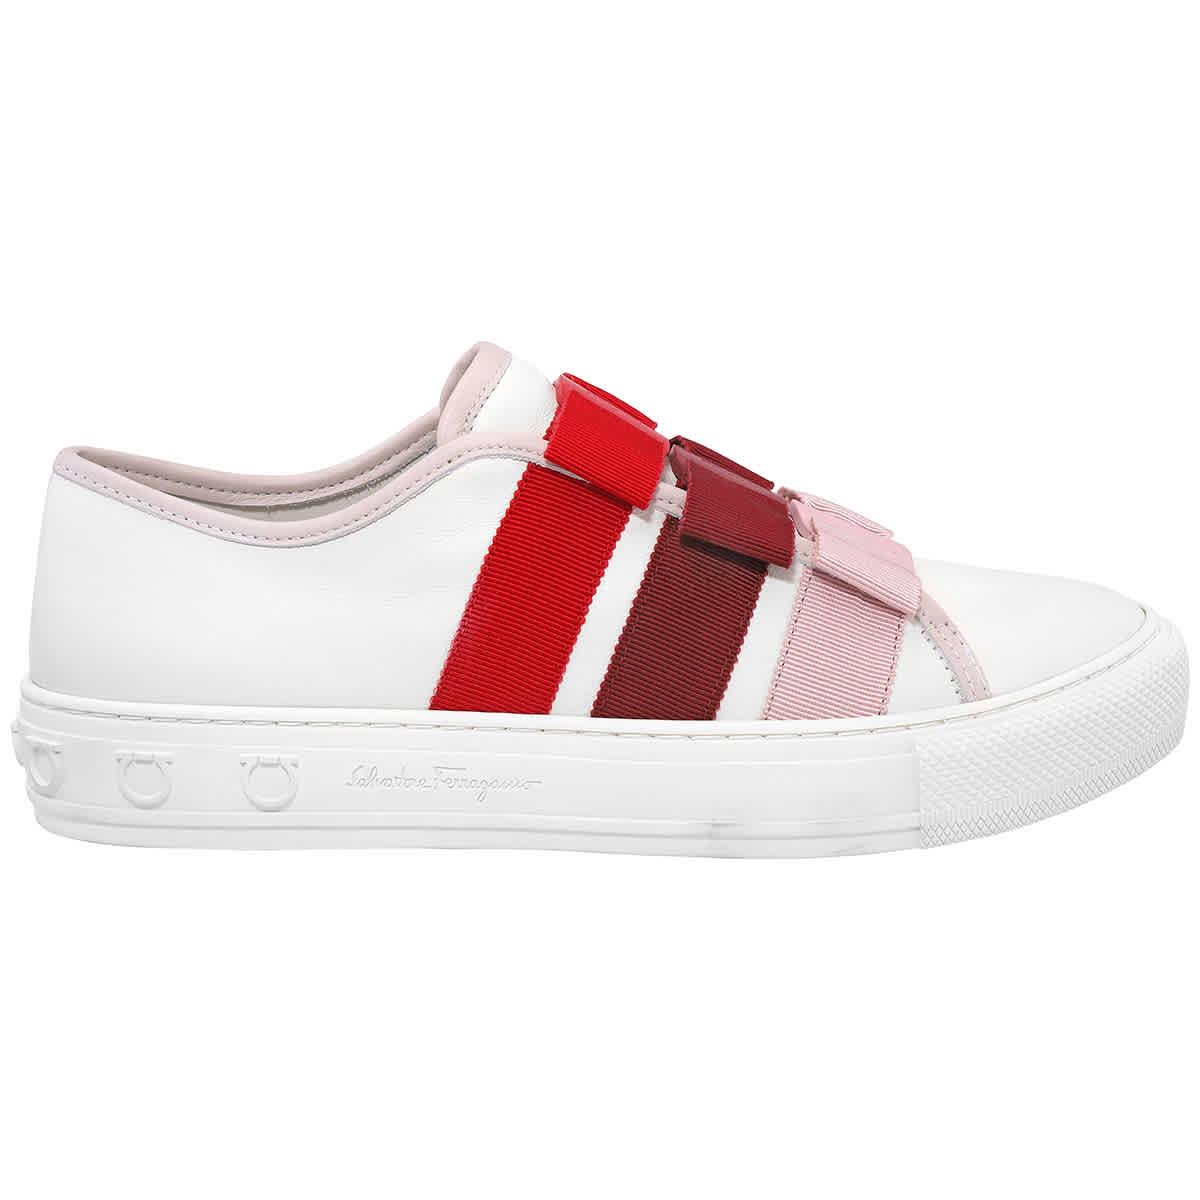 Ferragamo Nataly Vara Bow Sneakers in Red | Lyst